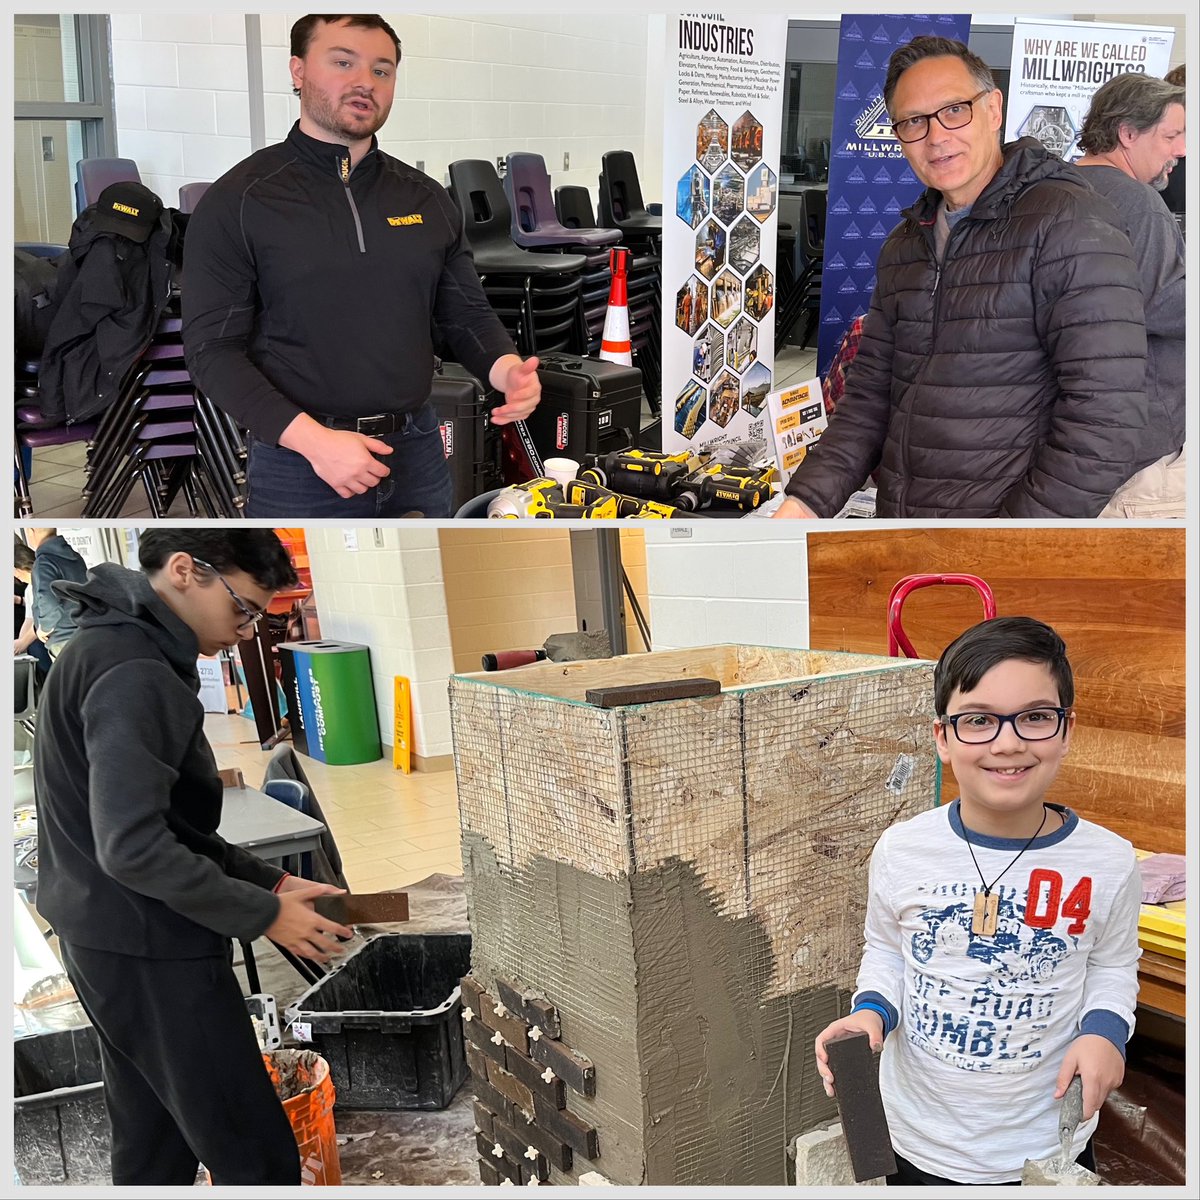 3rd Skilled Trades Career Fair @StFXSOS, Milton - A HUGE success!! Thanks to all students, parents & trades for coming out. Great organizing @HCDSB team - proud of you!! @emdelsordo @HCDSBdirector @stfx_steam @TownOfMiltonON @SkilledTradesON @OYAP_HCDSB